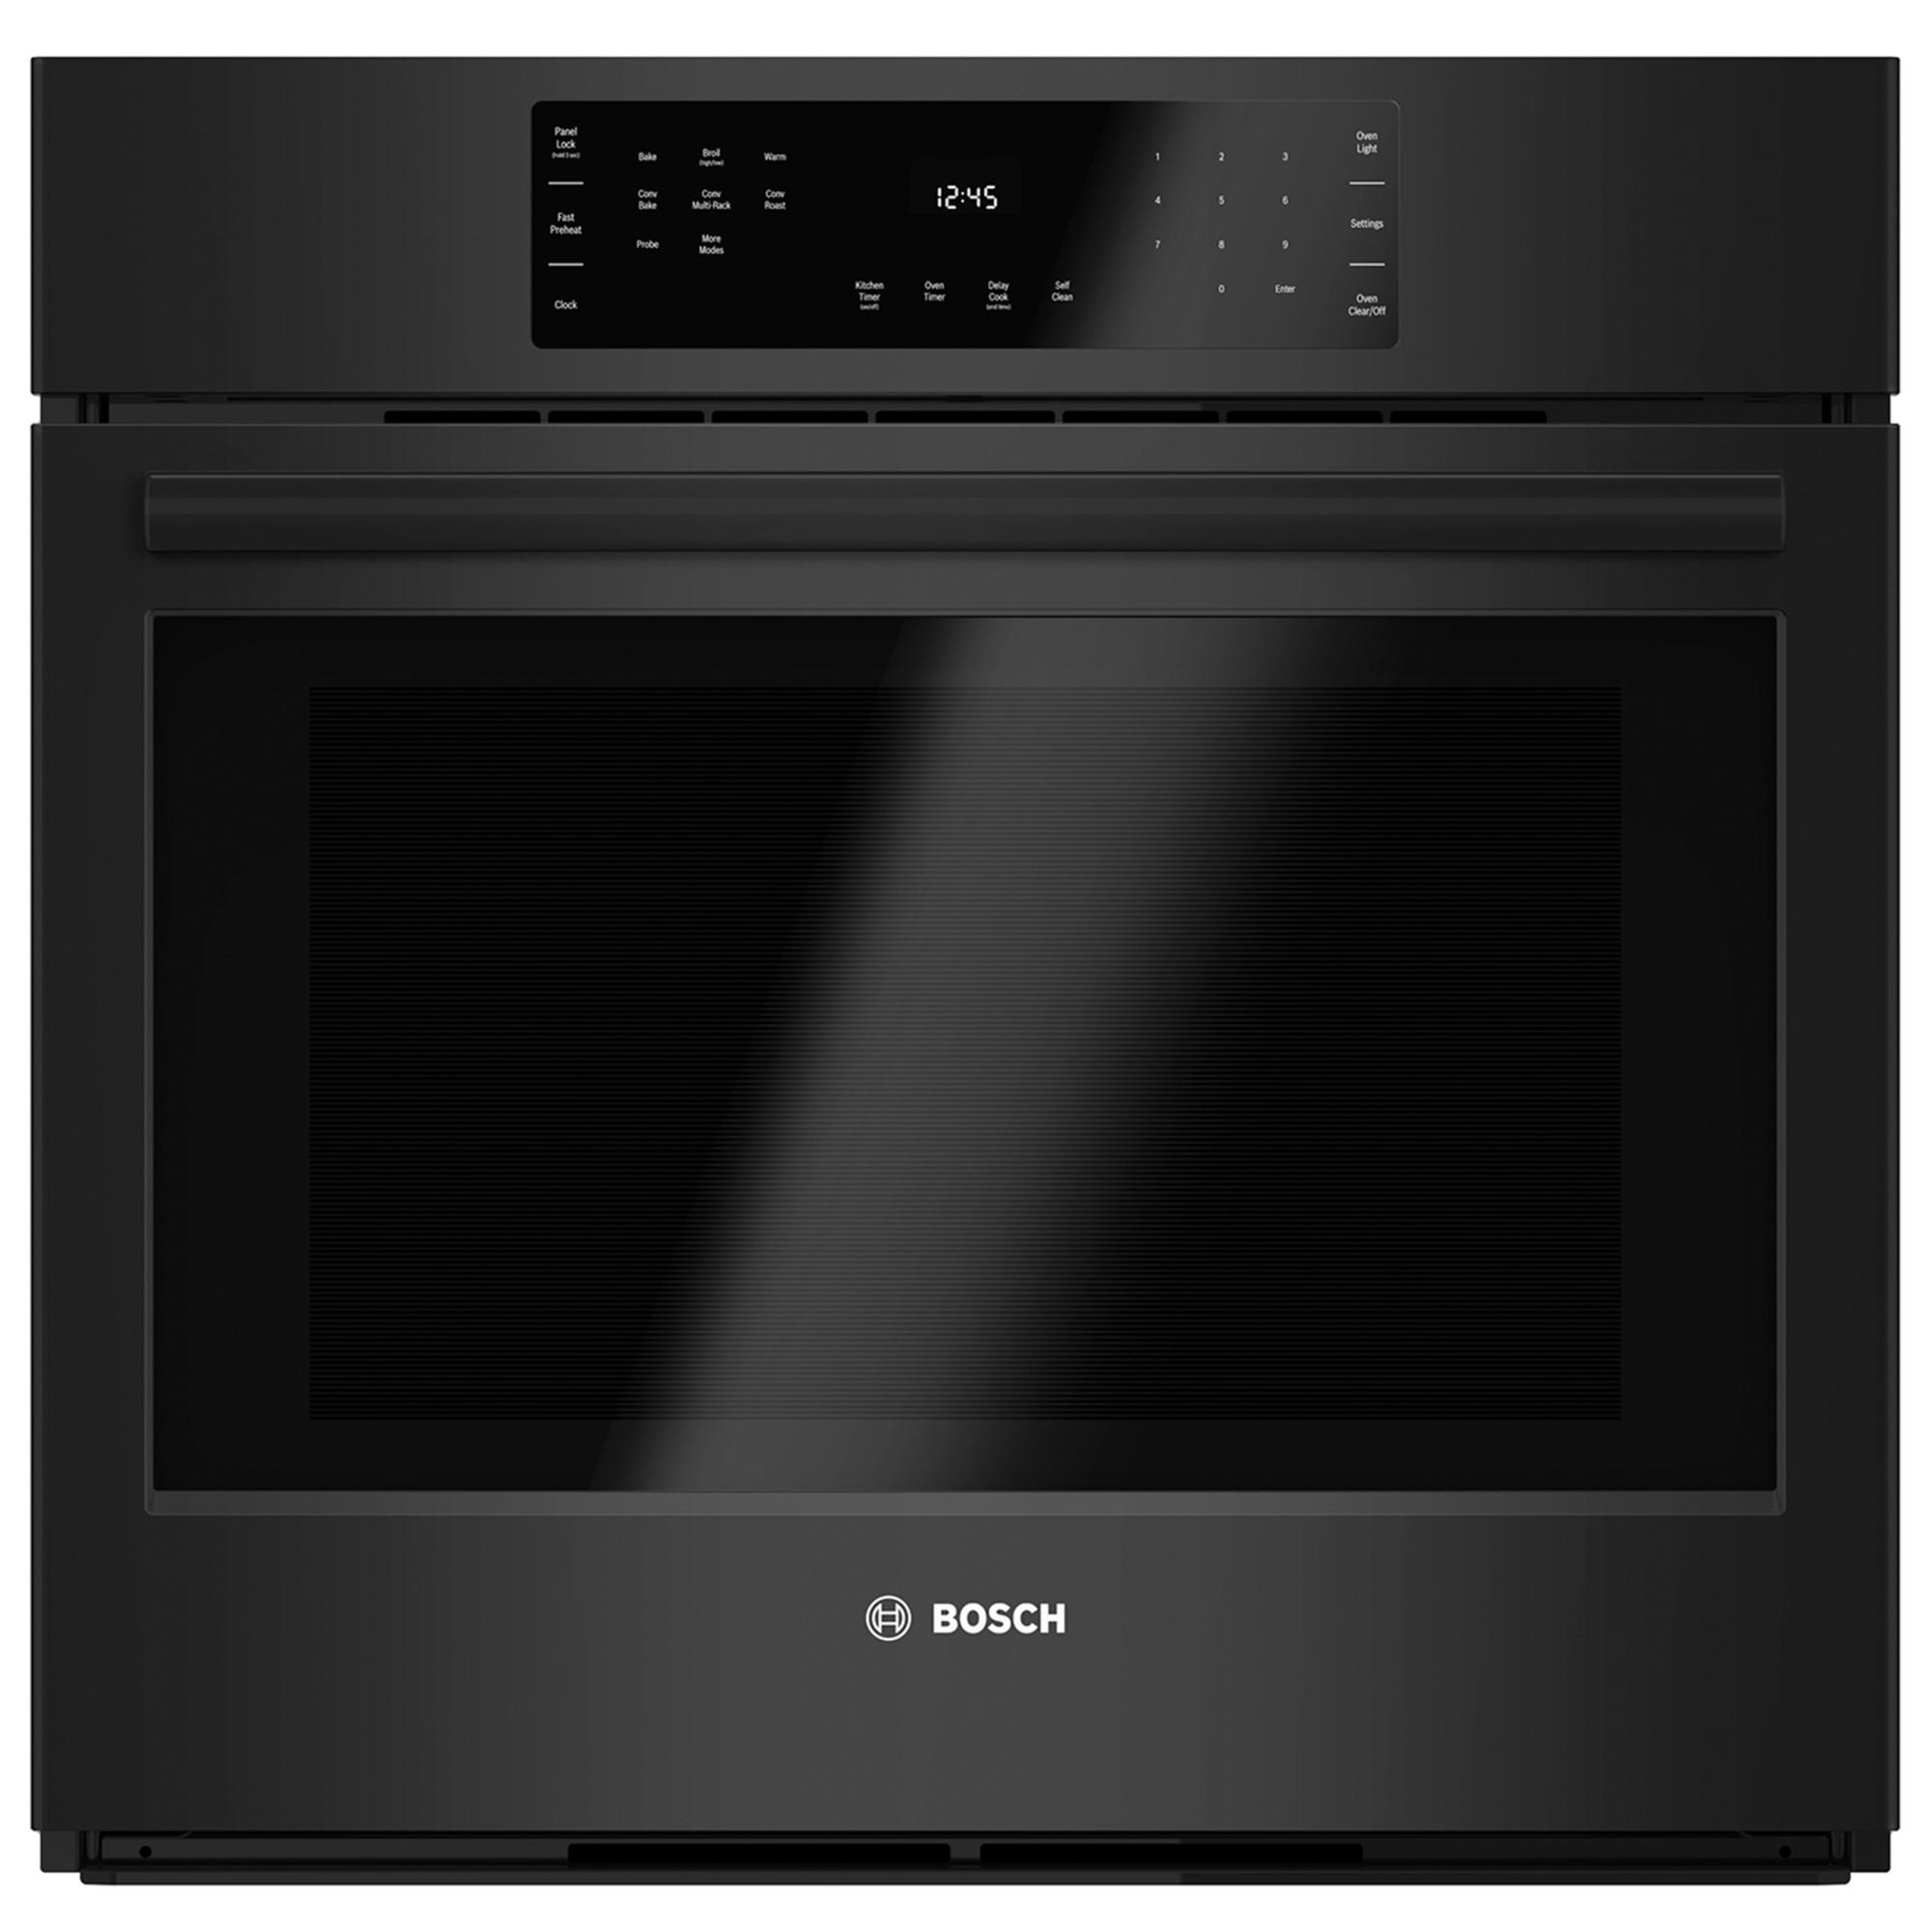 0825225906520 - BOSCH 800 SERIES HBL8461UC 30 SINGLE ELECTRIC WALL OVEN WITH 4.6 CU. FT. EUROPE